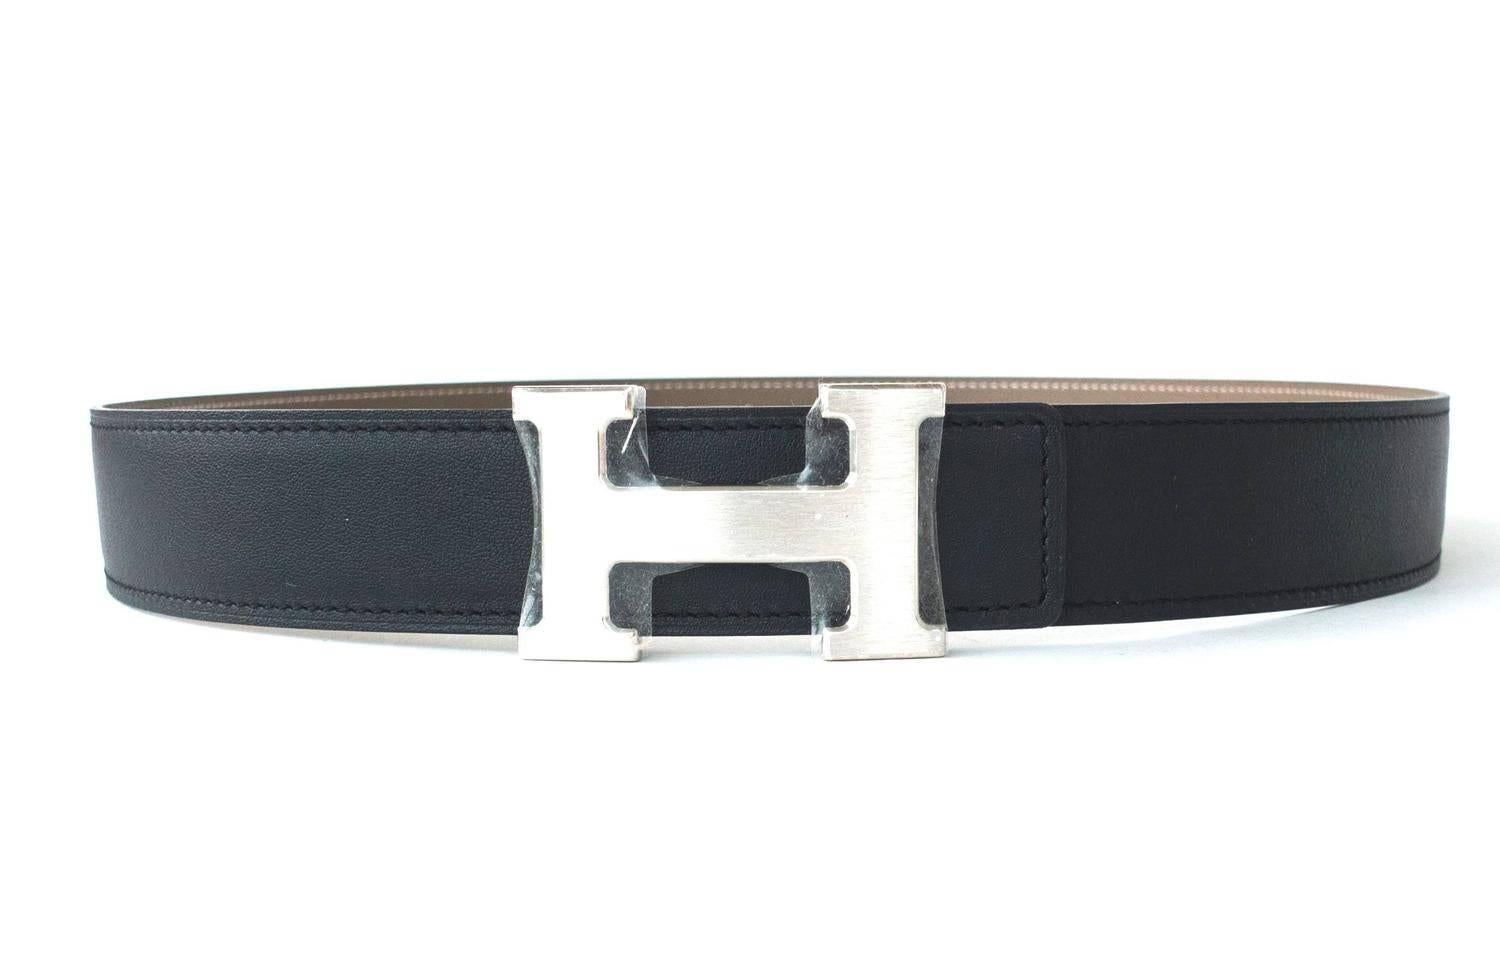 Hermes Etoupe Black 85cm Epsom Swift H Buckle Constance Belt Kit Classic
Brand New in Box.  Store fresh. Pristine condition.
Perfect gift! Comes full set with Hermes belt strap, belt buckle, sleeper for belt buckle, and orange Hermes belt box.
The